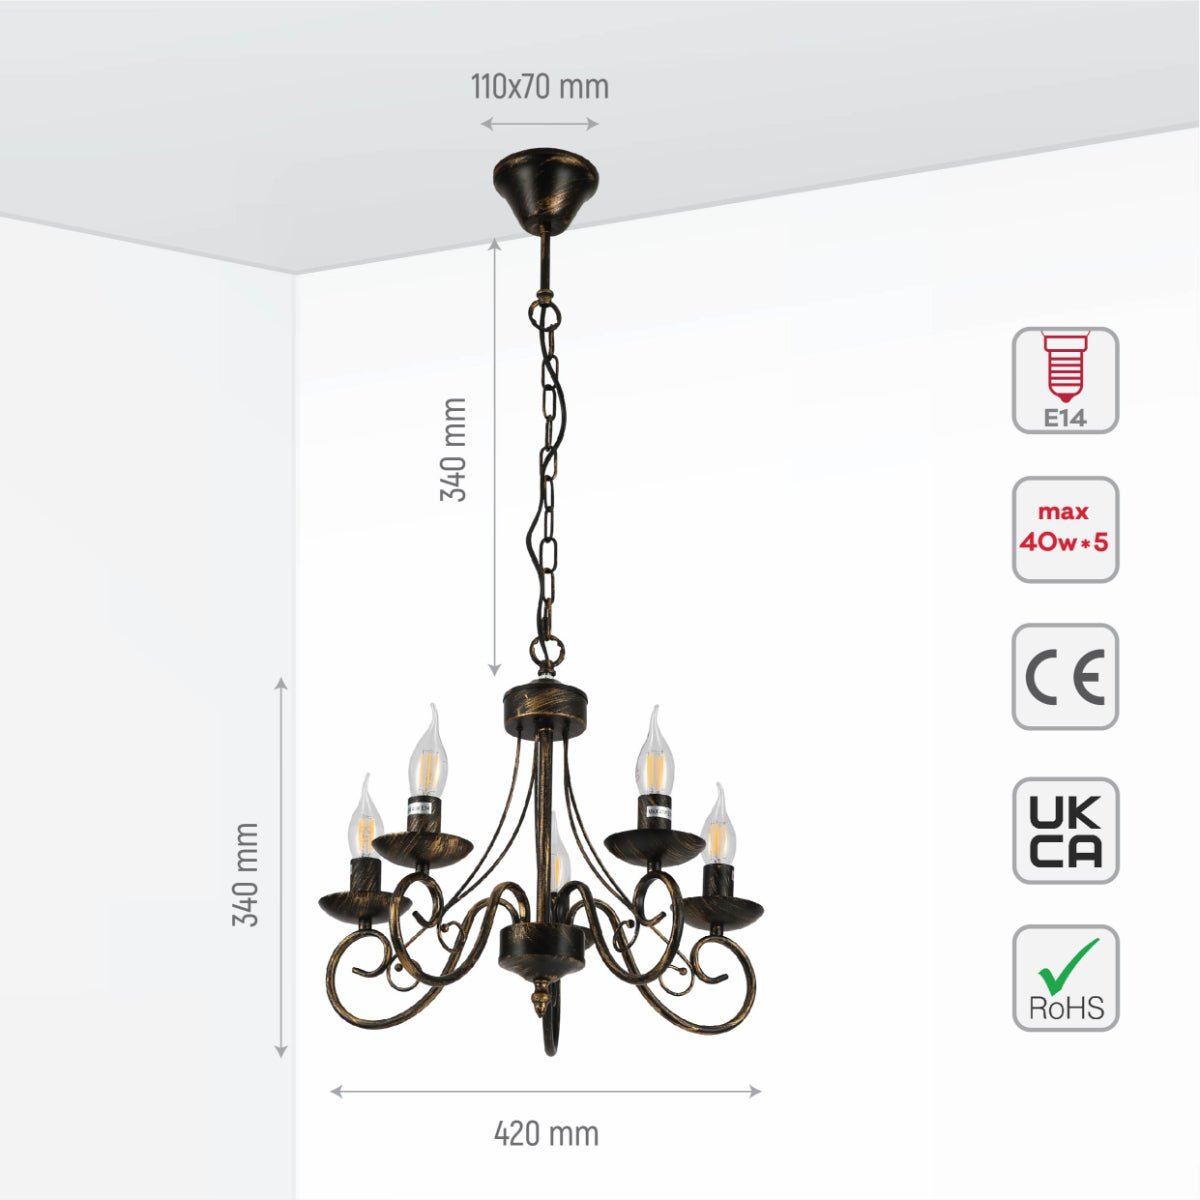 Size and specs of Candle Vintage Gold Patinated Black French Chandelier Ceiling Light 5xE14 | TEKLED 152-17615